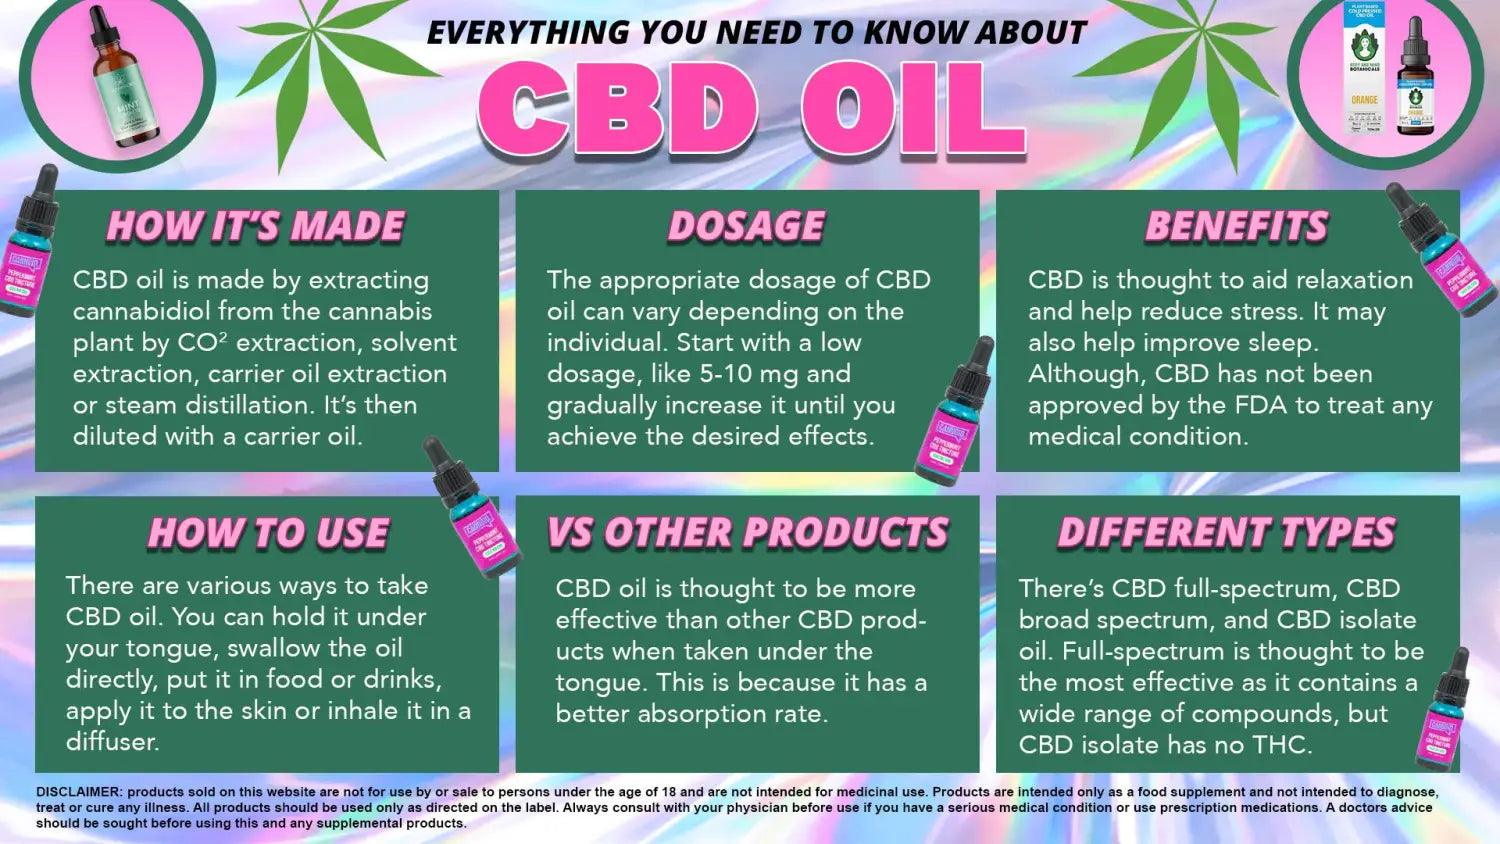 THE SCIENCE BEHIND CBD OIL